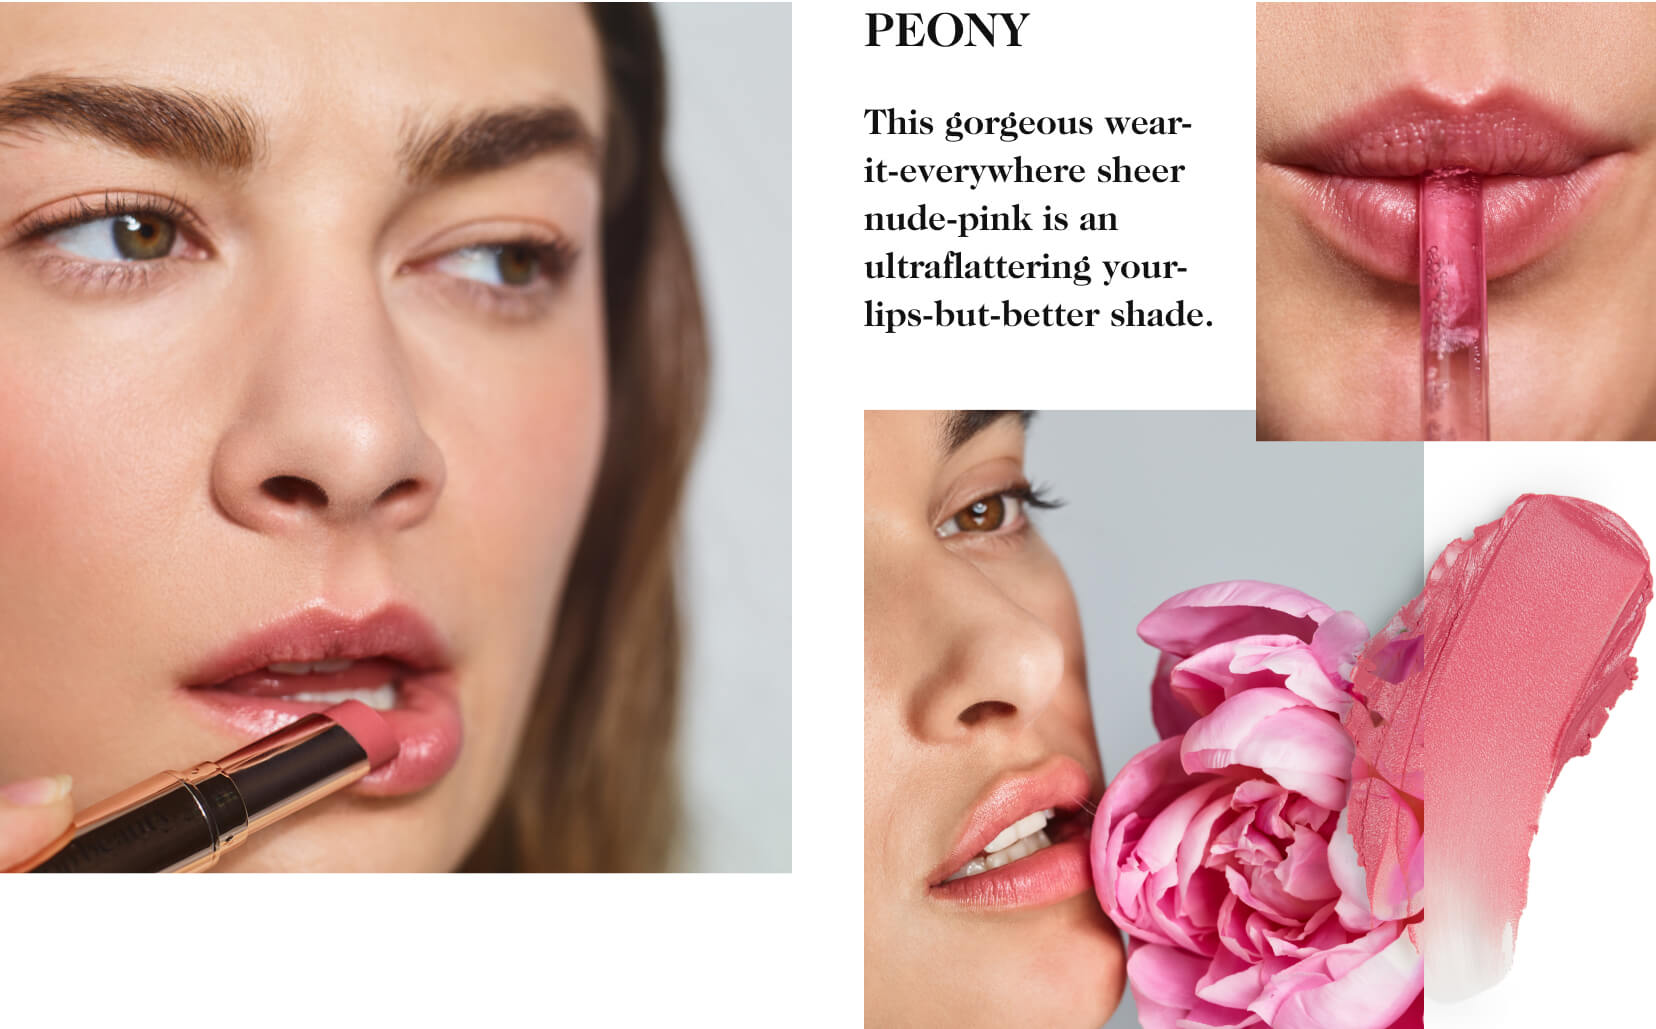 Peony - This pretty, wearable nude pink is an ultra-flattering your-lips-but-better shade.